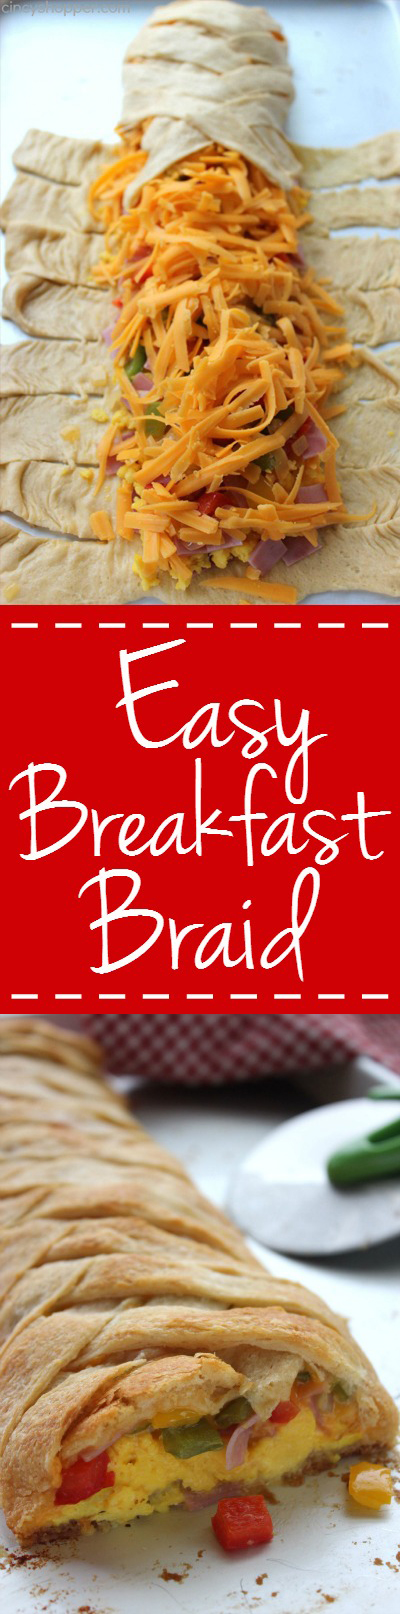 SUPER Easy Breakfast Braid - Loaded them up with your favorite omelette toppings. GREAT for feeding a crowd.